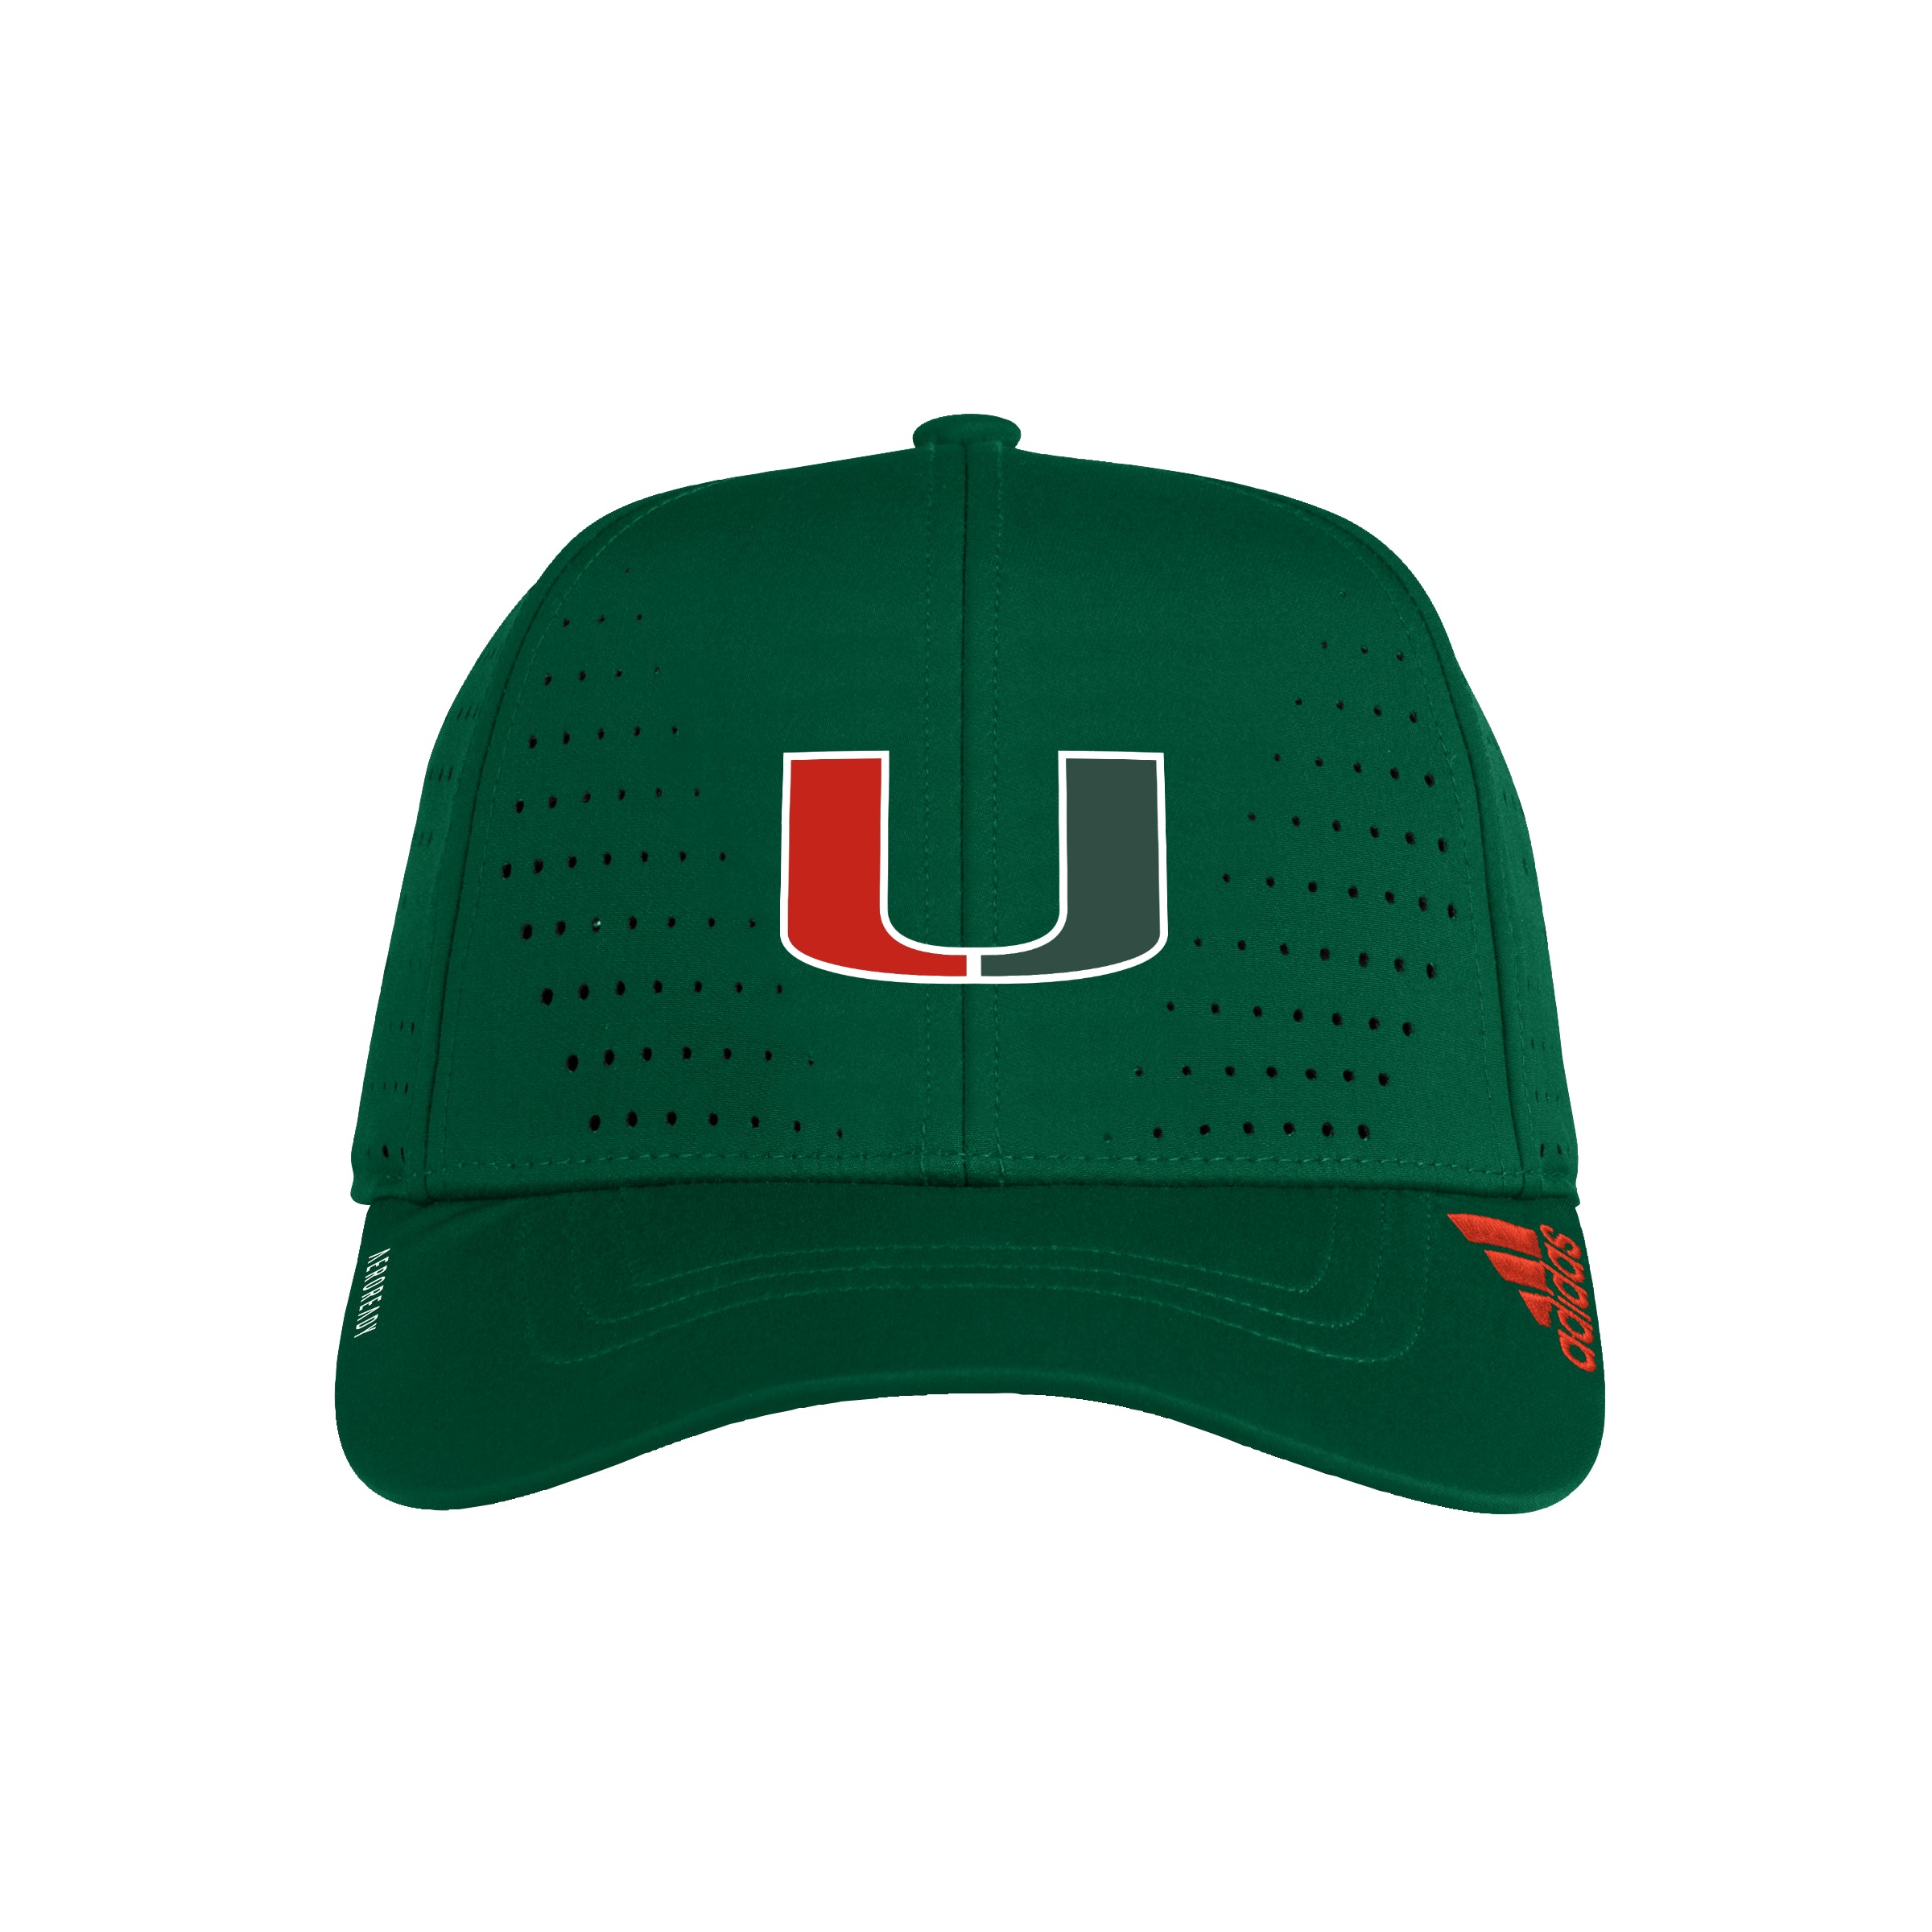 Miami Hurricanes 2023 adidas Structured Perforated Adjustable Hat - Green